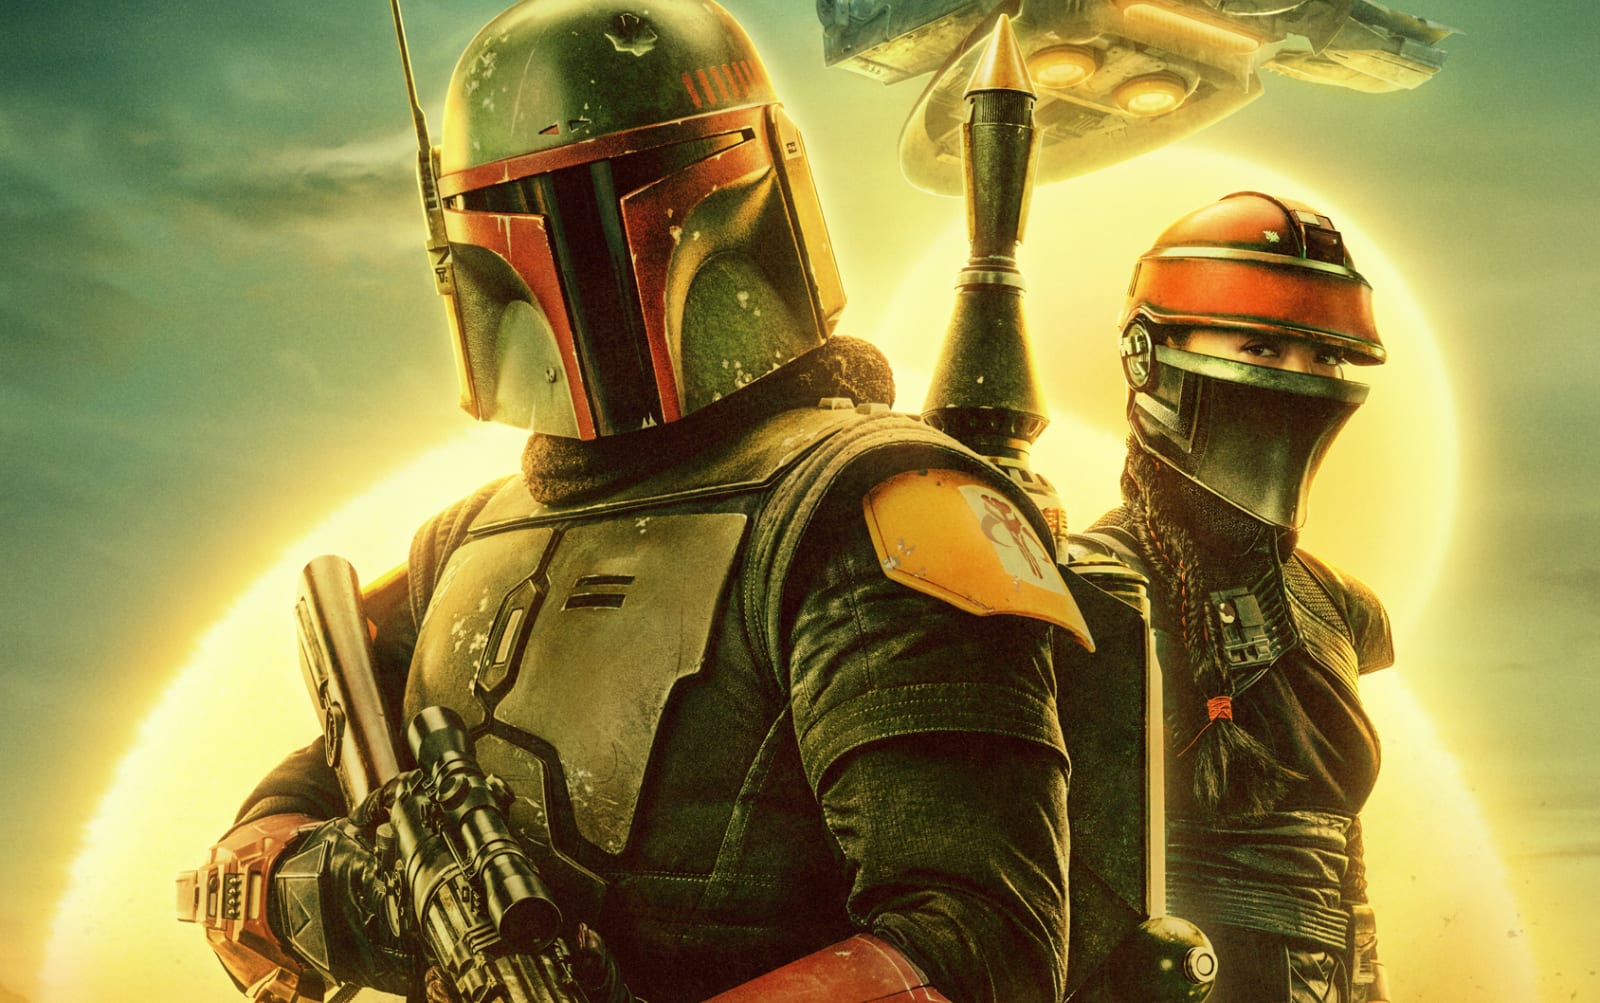 Bobba Fett on Disney +: Watch the new commercial and download the posters of the new Star Wars series